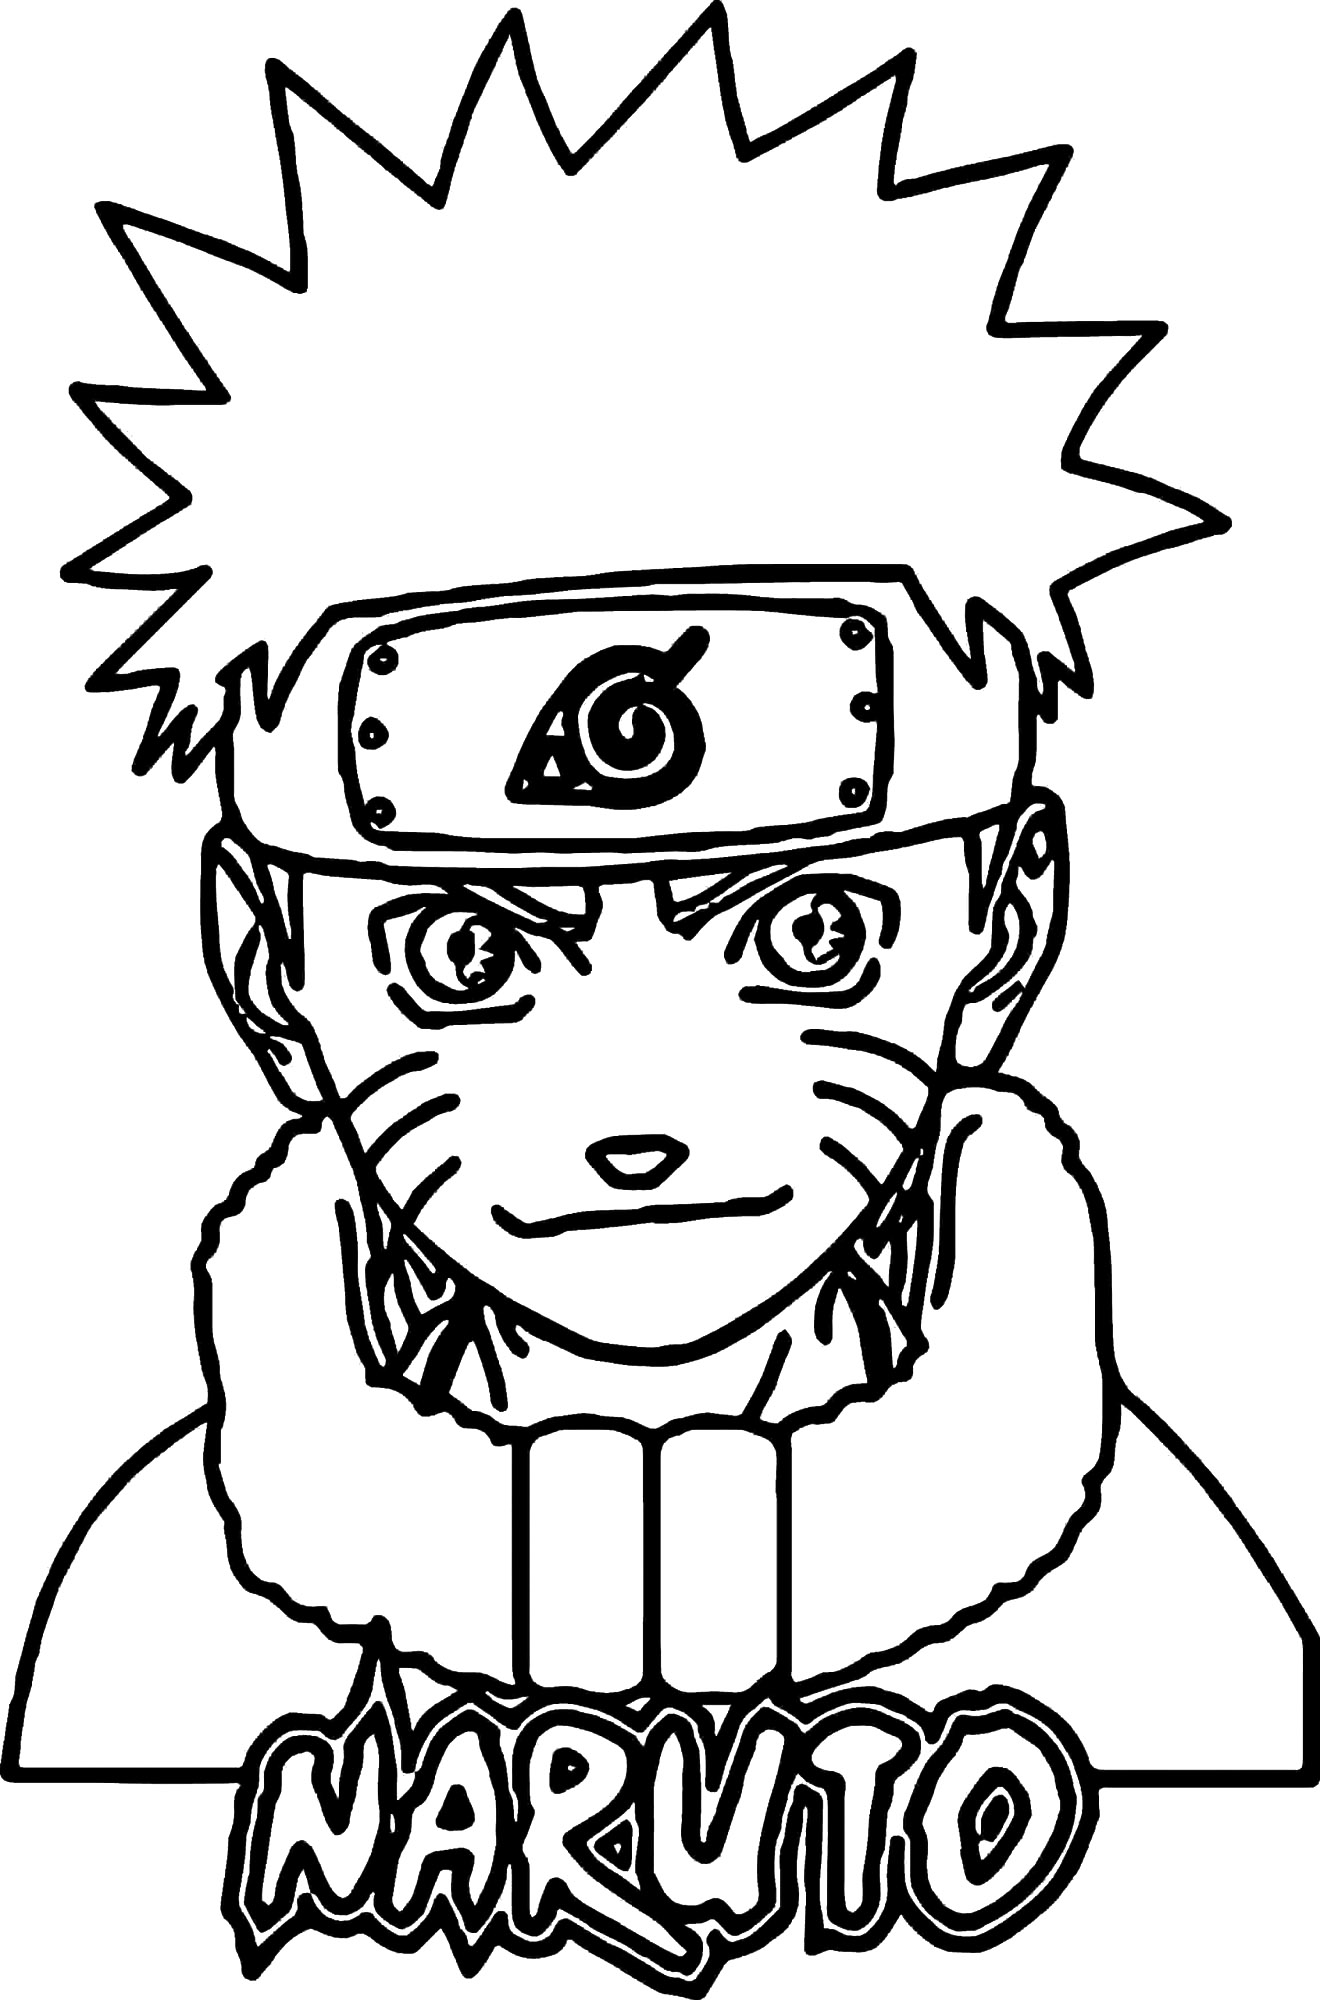 Naruto In Childhood Coloring Page